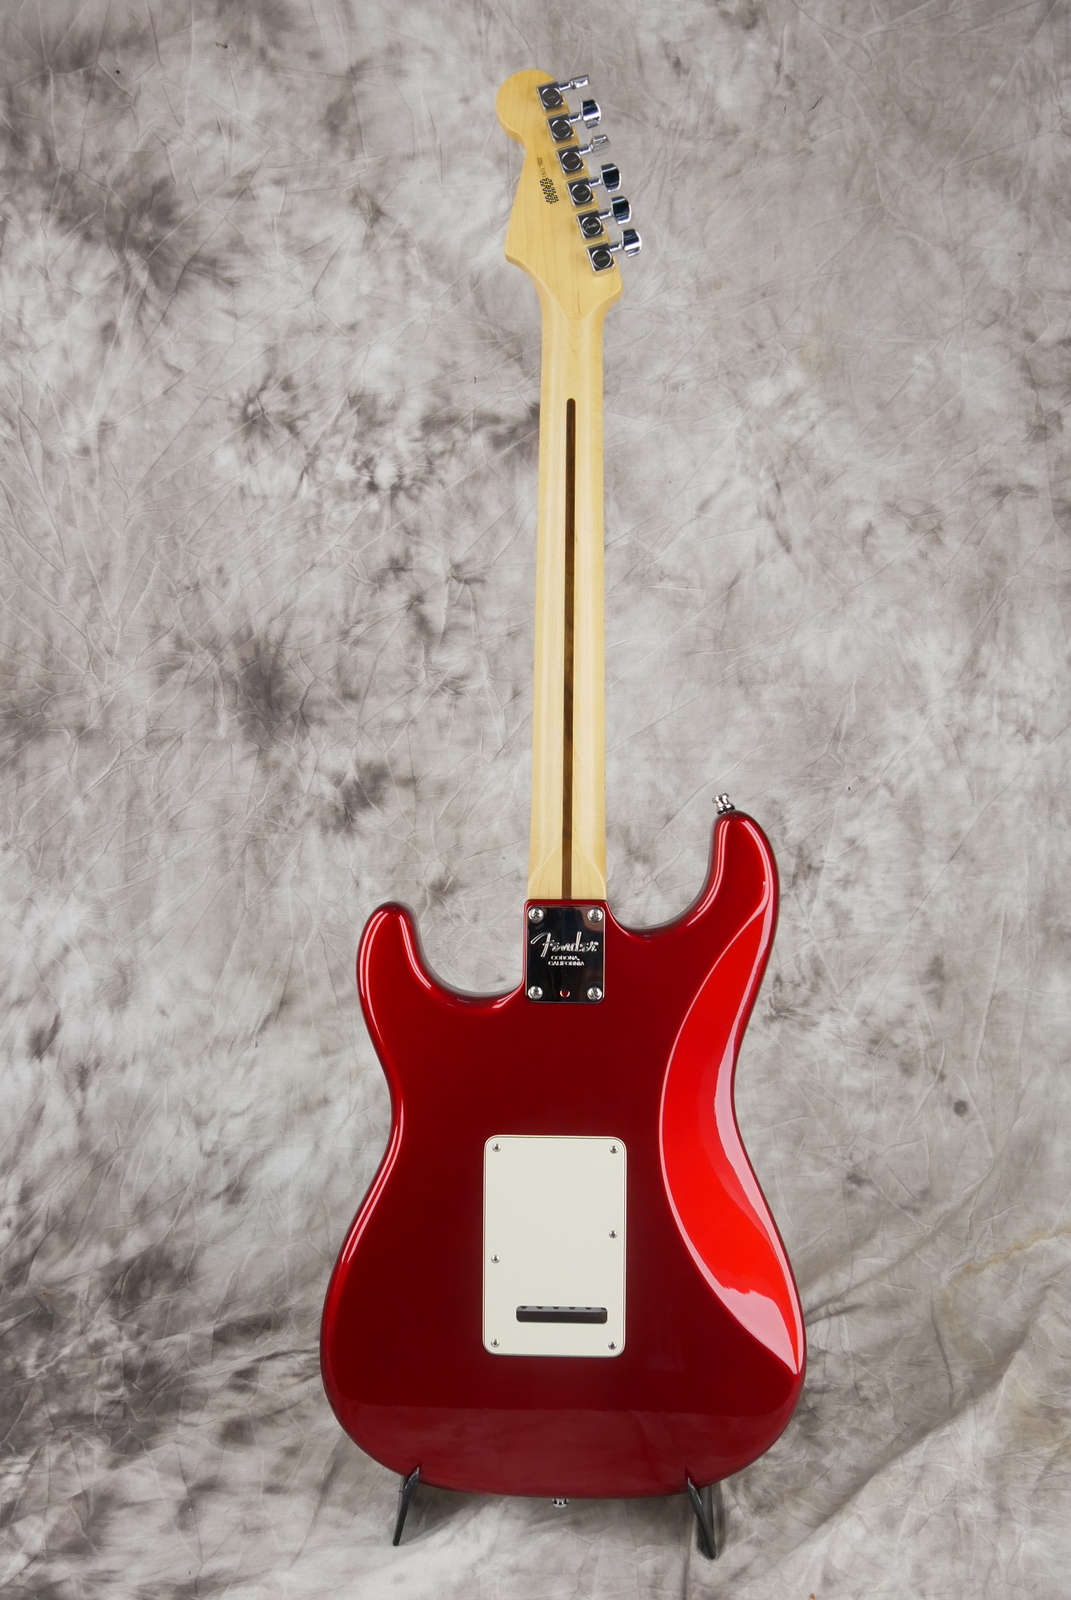 img/vintage/5279/Fender_Stratocaster_USA_built_from_parts_candy_apple_red_2015-002.JPG